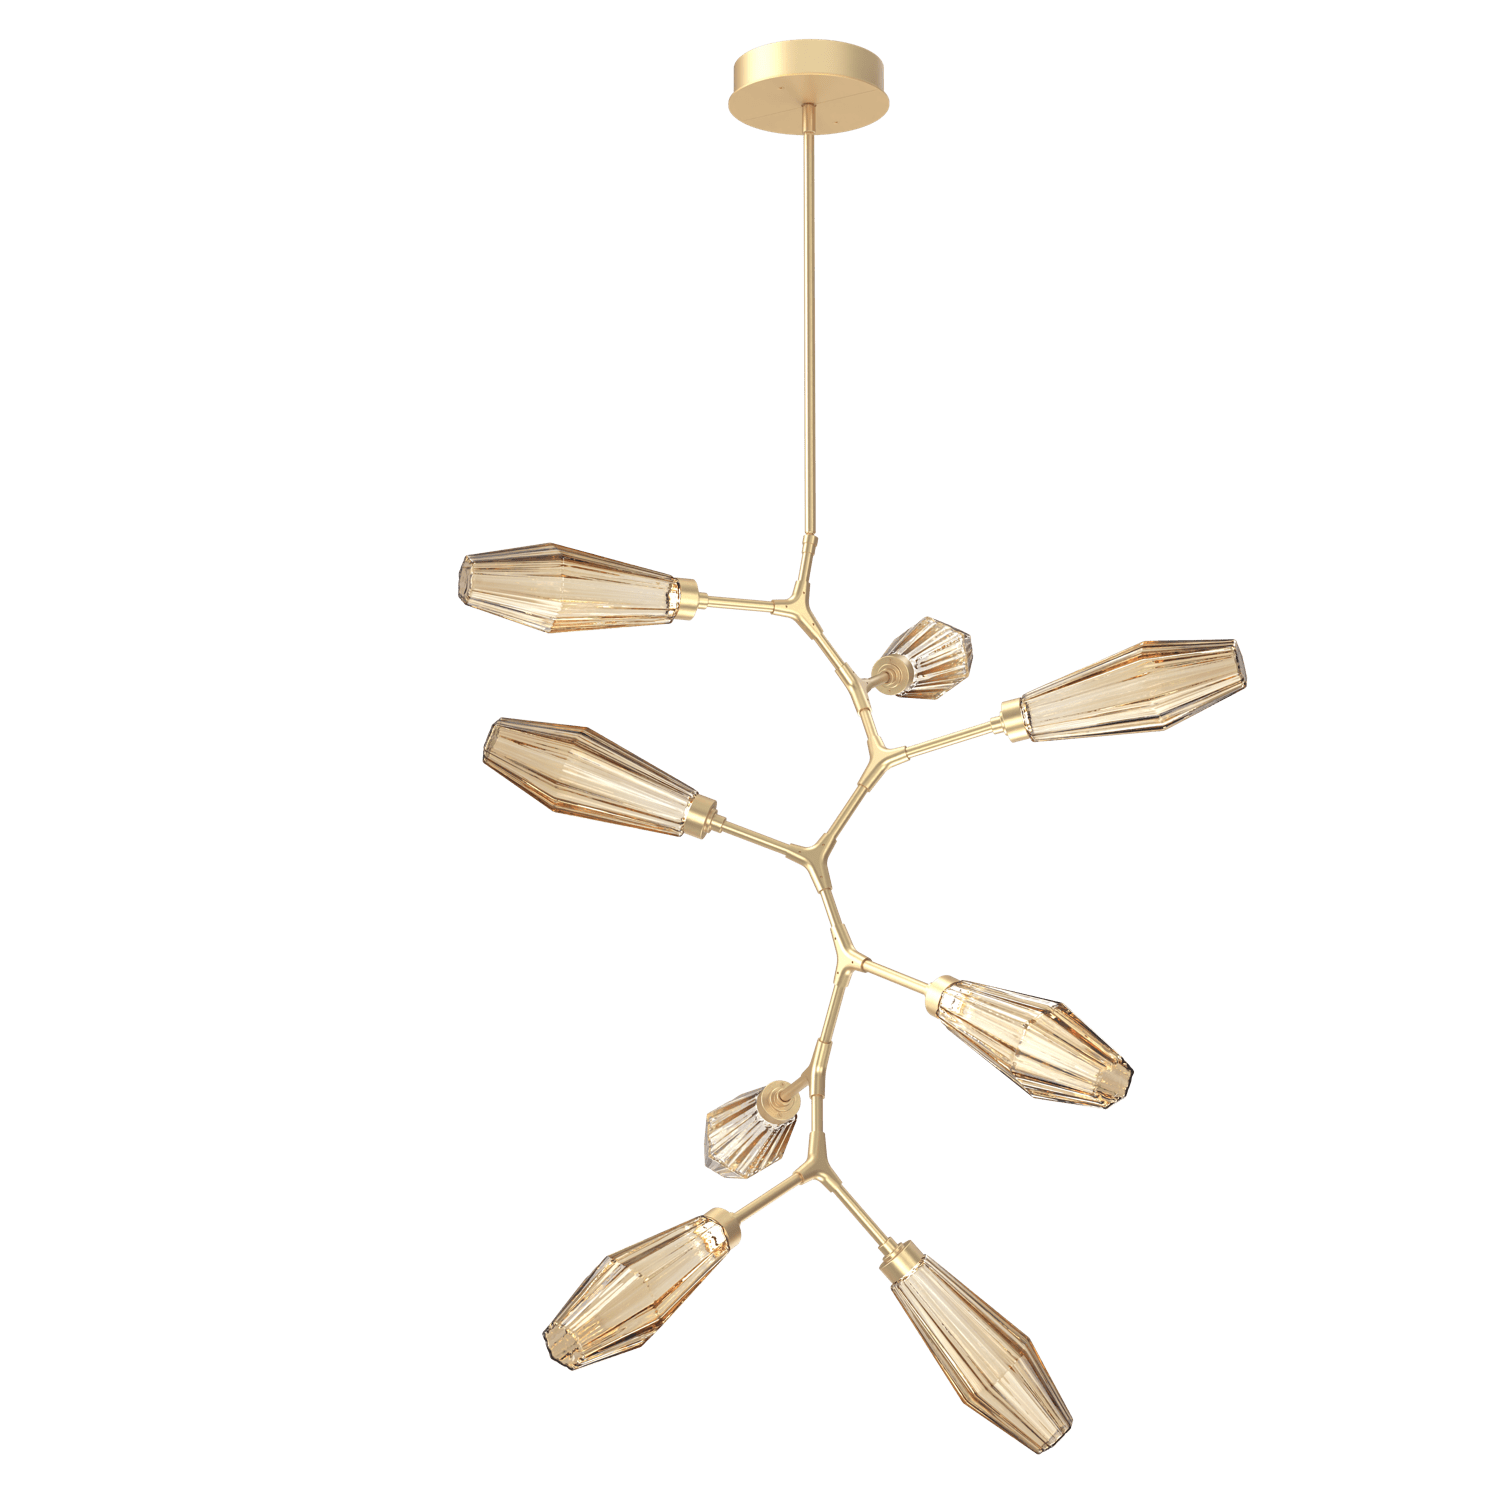 CHB0049-VB-GB-RB-Hammerton-Studio-Aalto-8-light-modern-vine-chandelier-with-gilded-brass-finish-and-optic-ribbed-bronze-glass-shades-and-LED-lamping